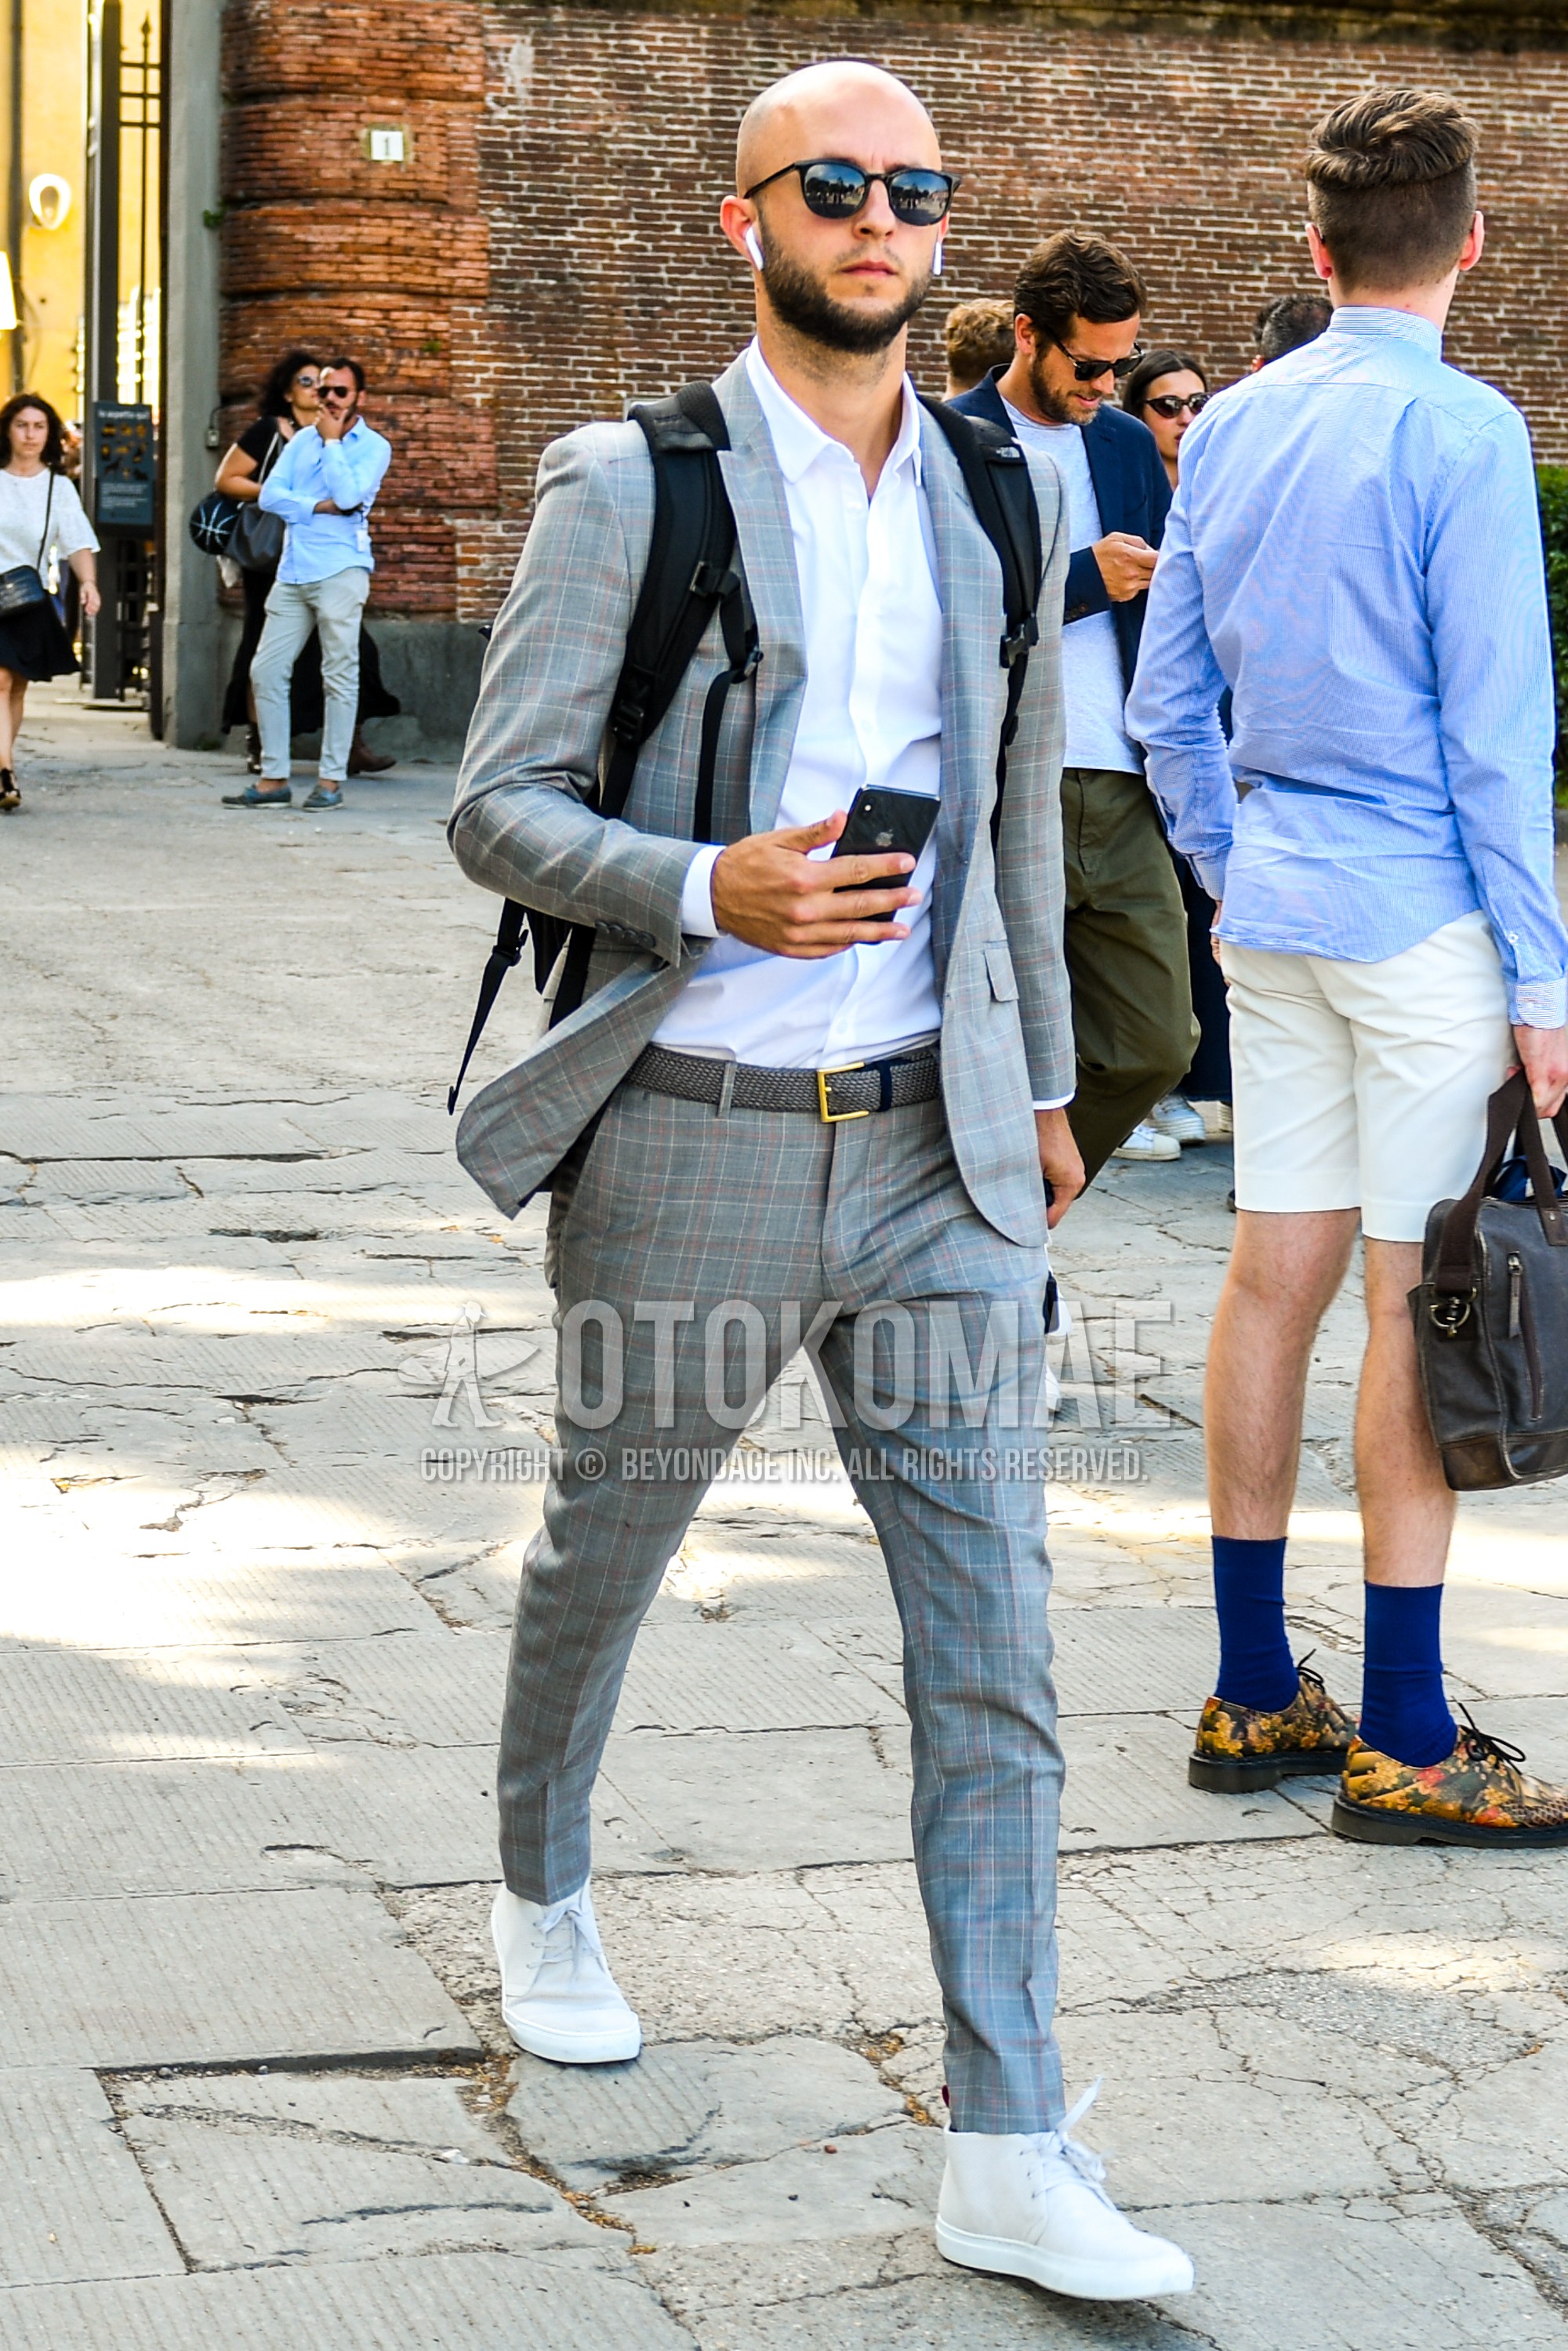 Men's spring summer autumn outfit with plain sunglasses, white plain shirt, gray plain braided belt, white high-cut sneakers, gray check suit.